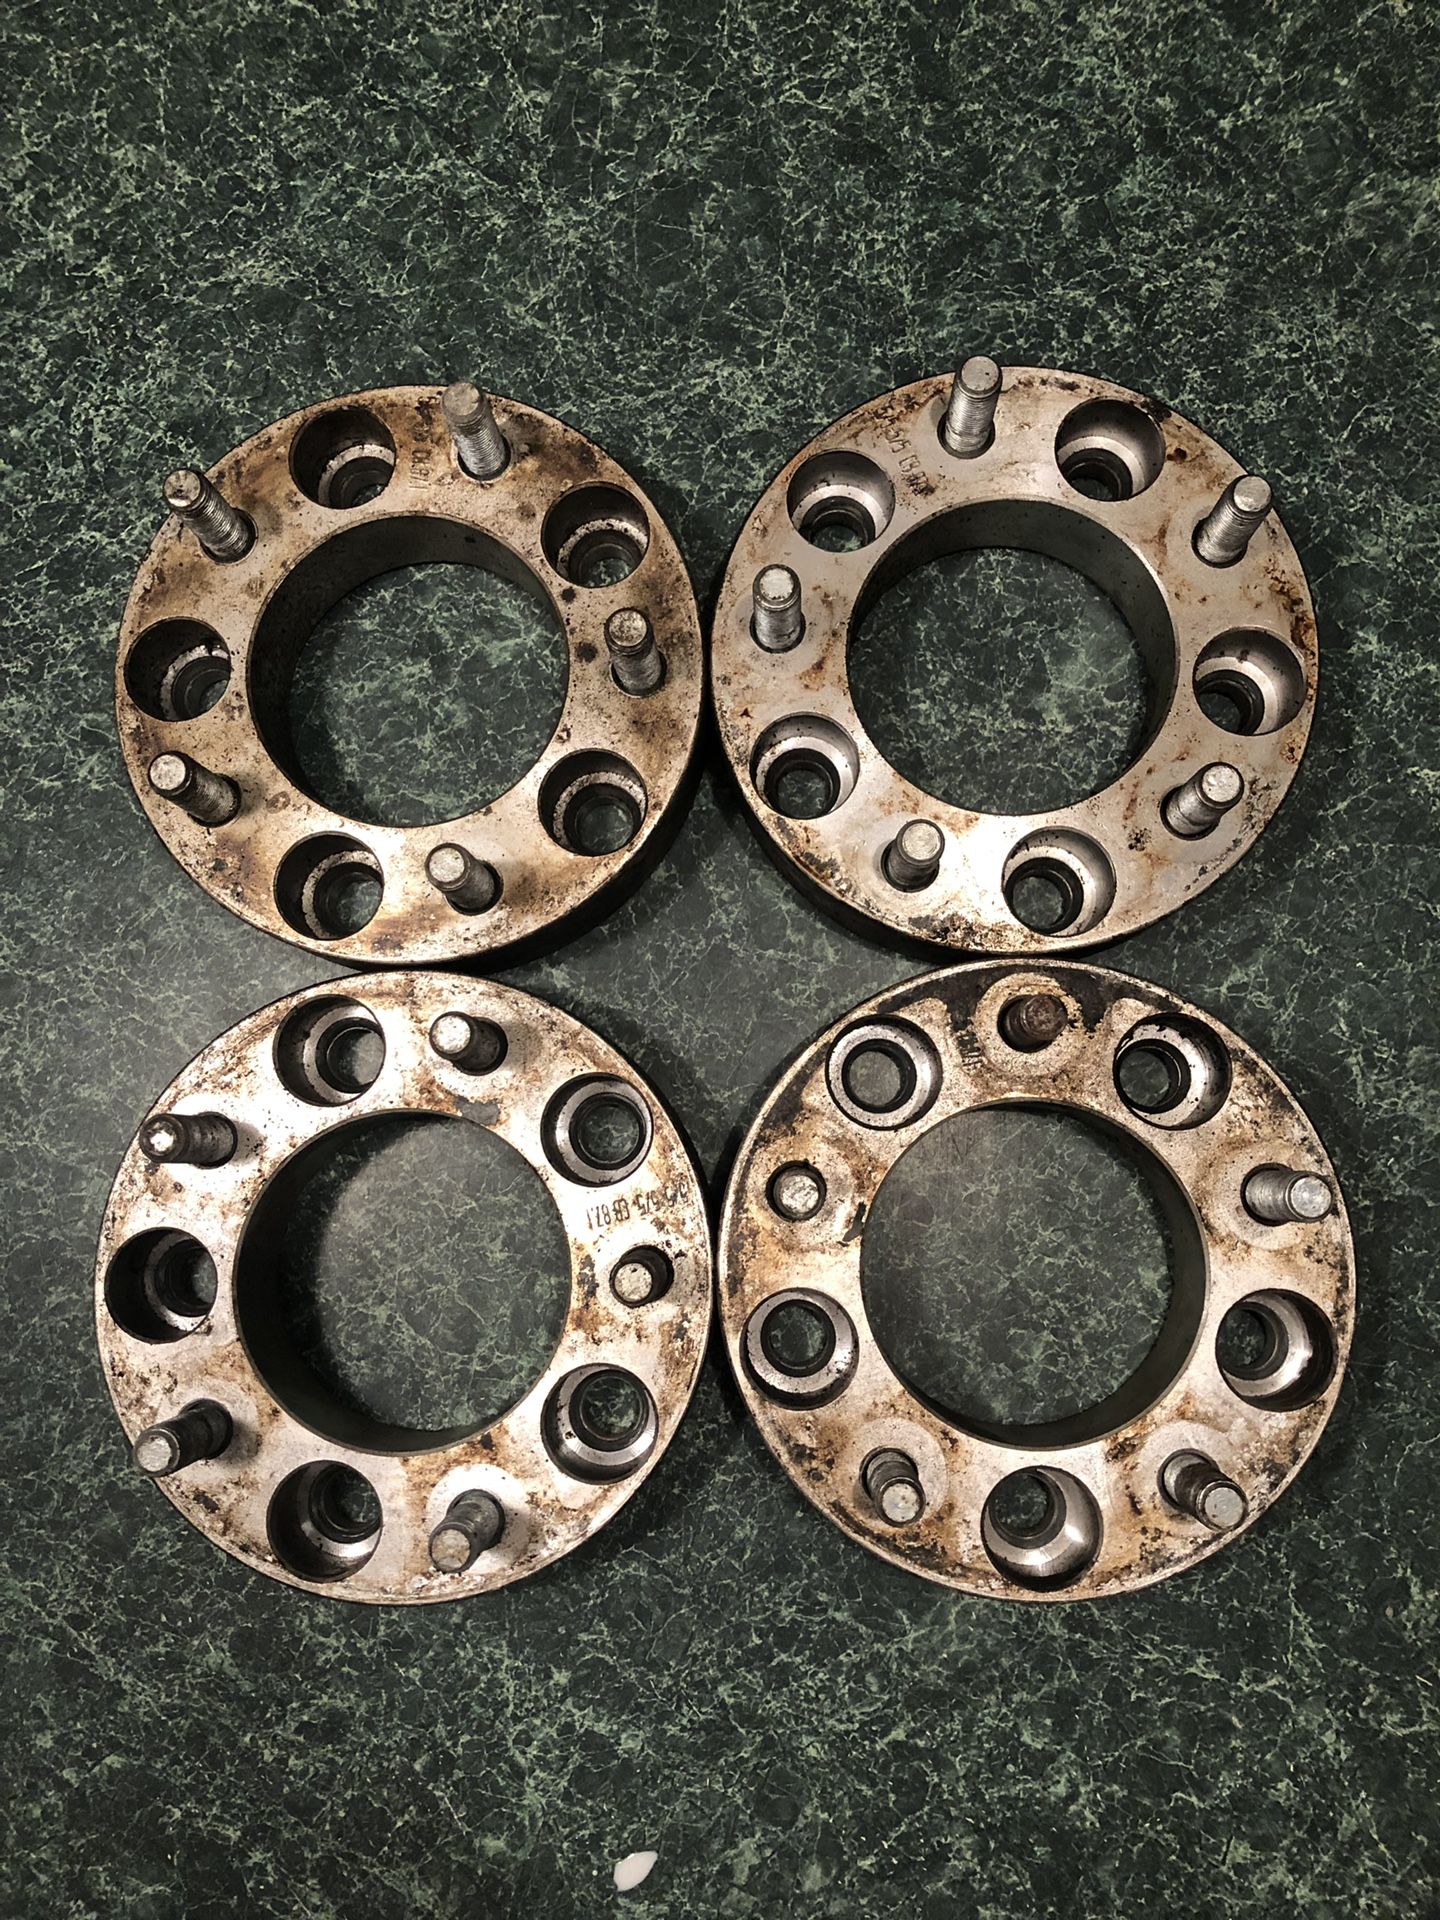 Wheel spacers 5x5 bolt pattern 1.5”thick